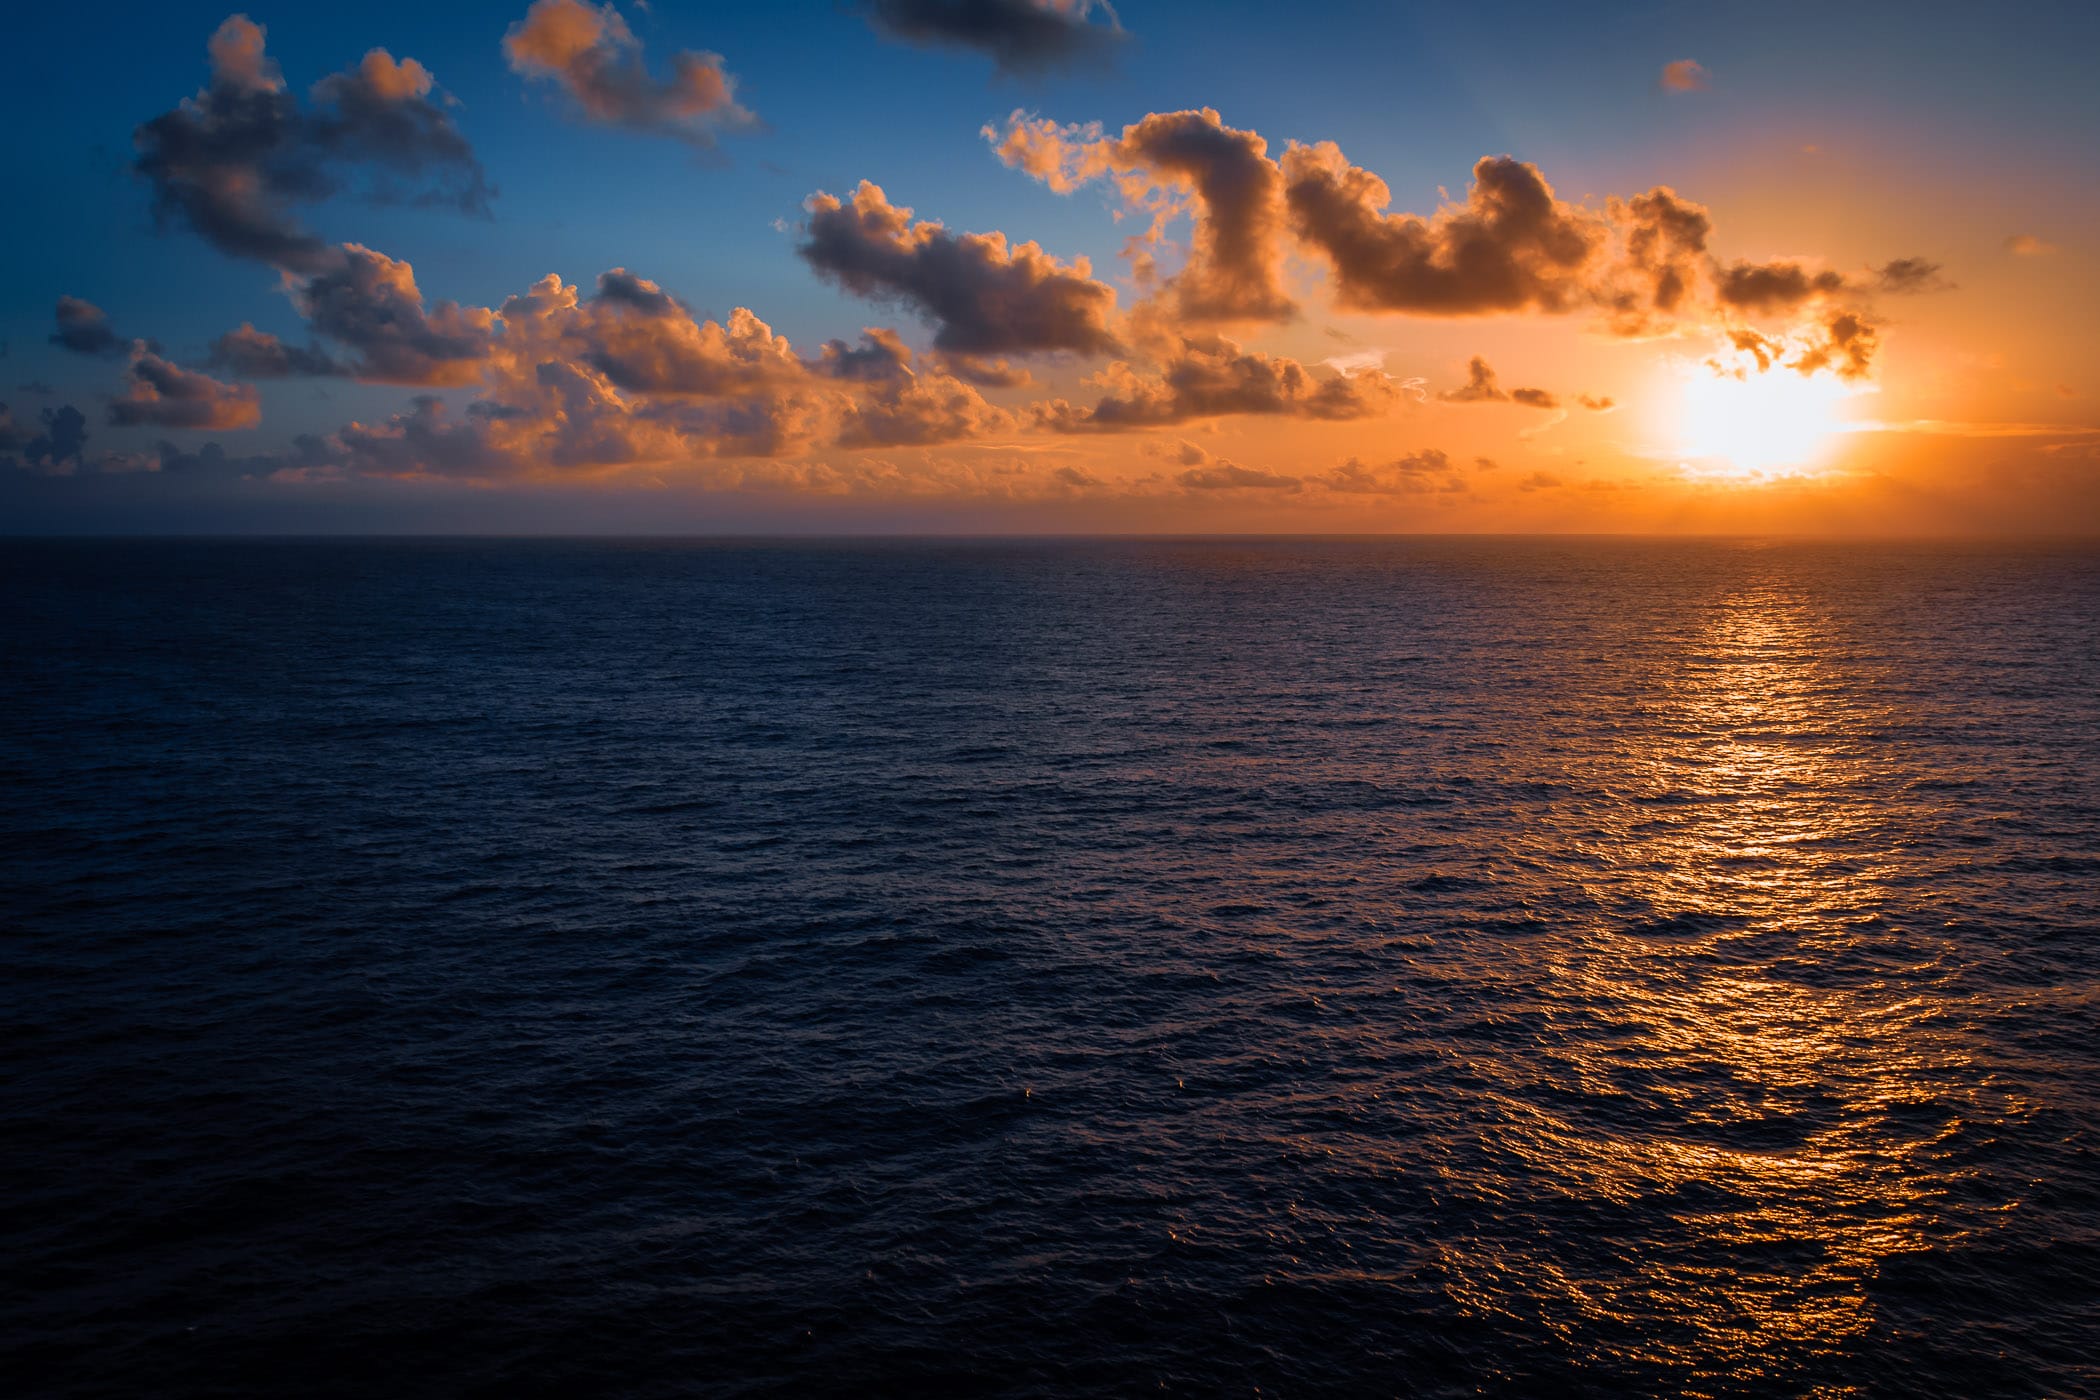 The sun rises over the Gulf of Mexico, as seen from the deck of the cruise ship Carnival Triumph.